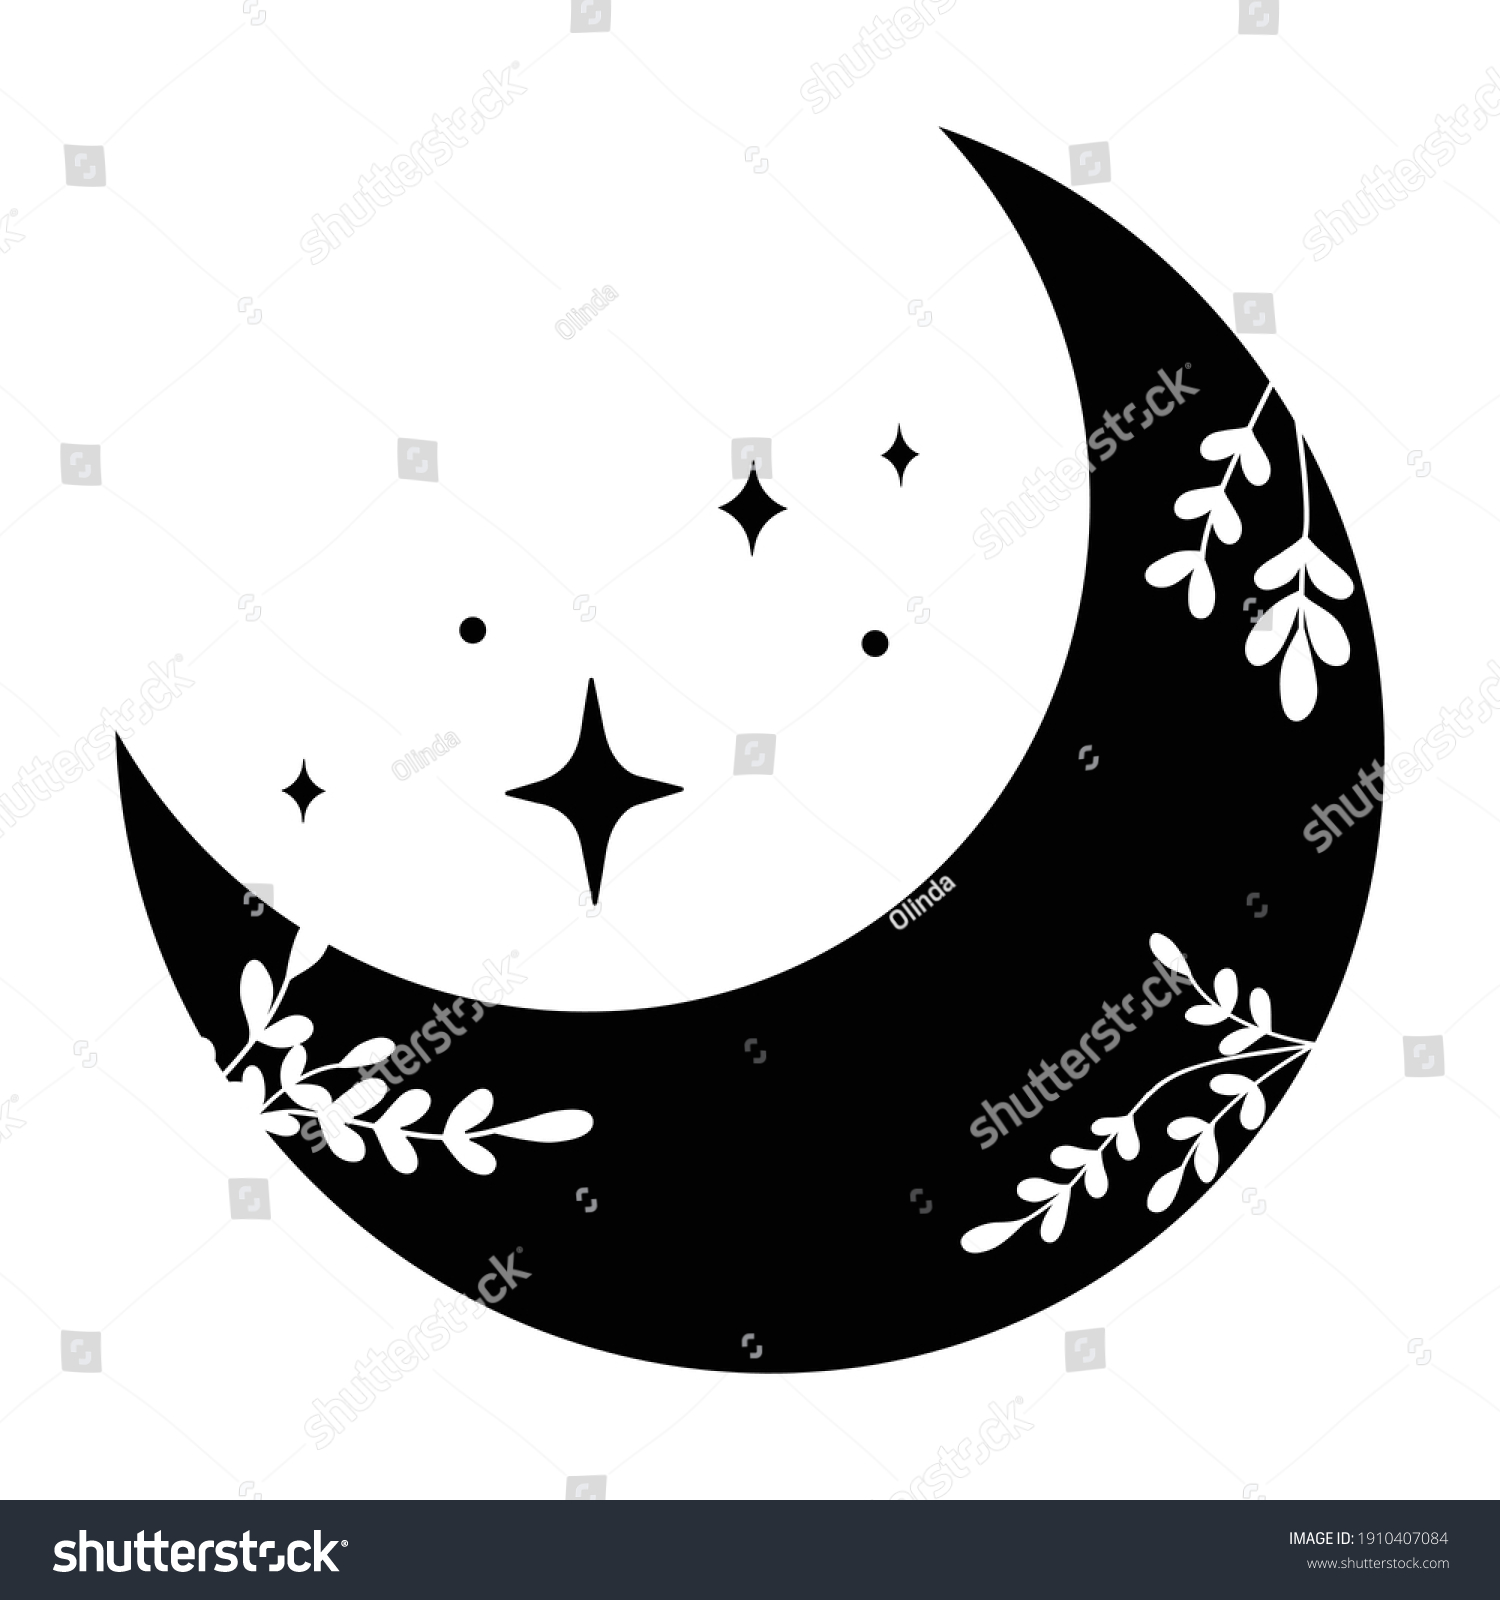 SVG of Black crescent moon with white lace floral ornament, stars. Design element for logos icons. Vector illustration. Modern Boho style doodle art svg